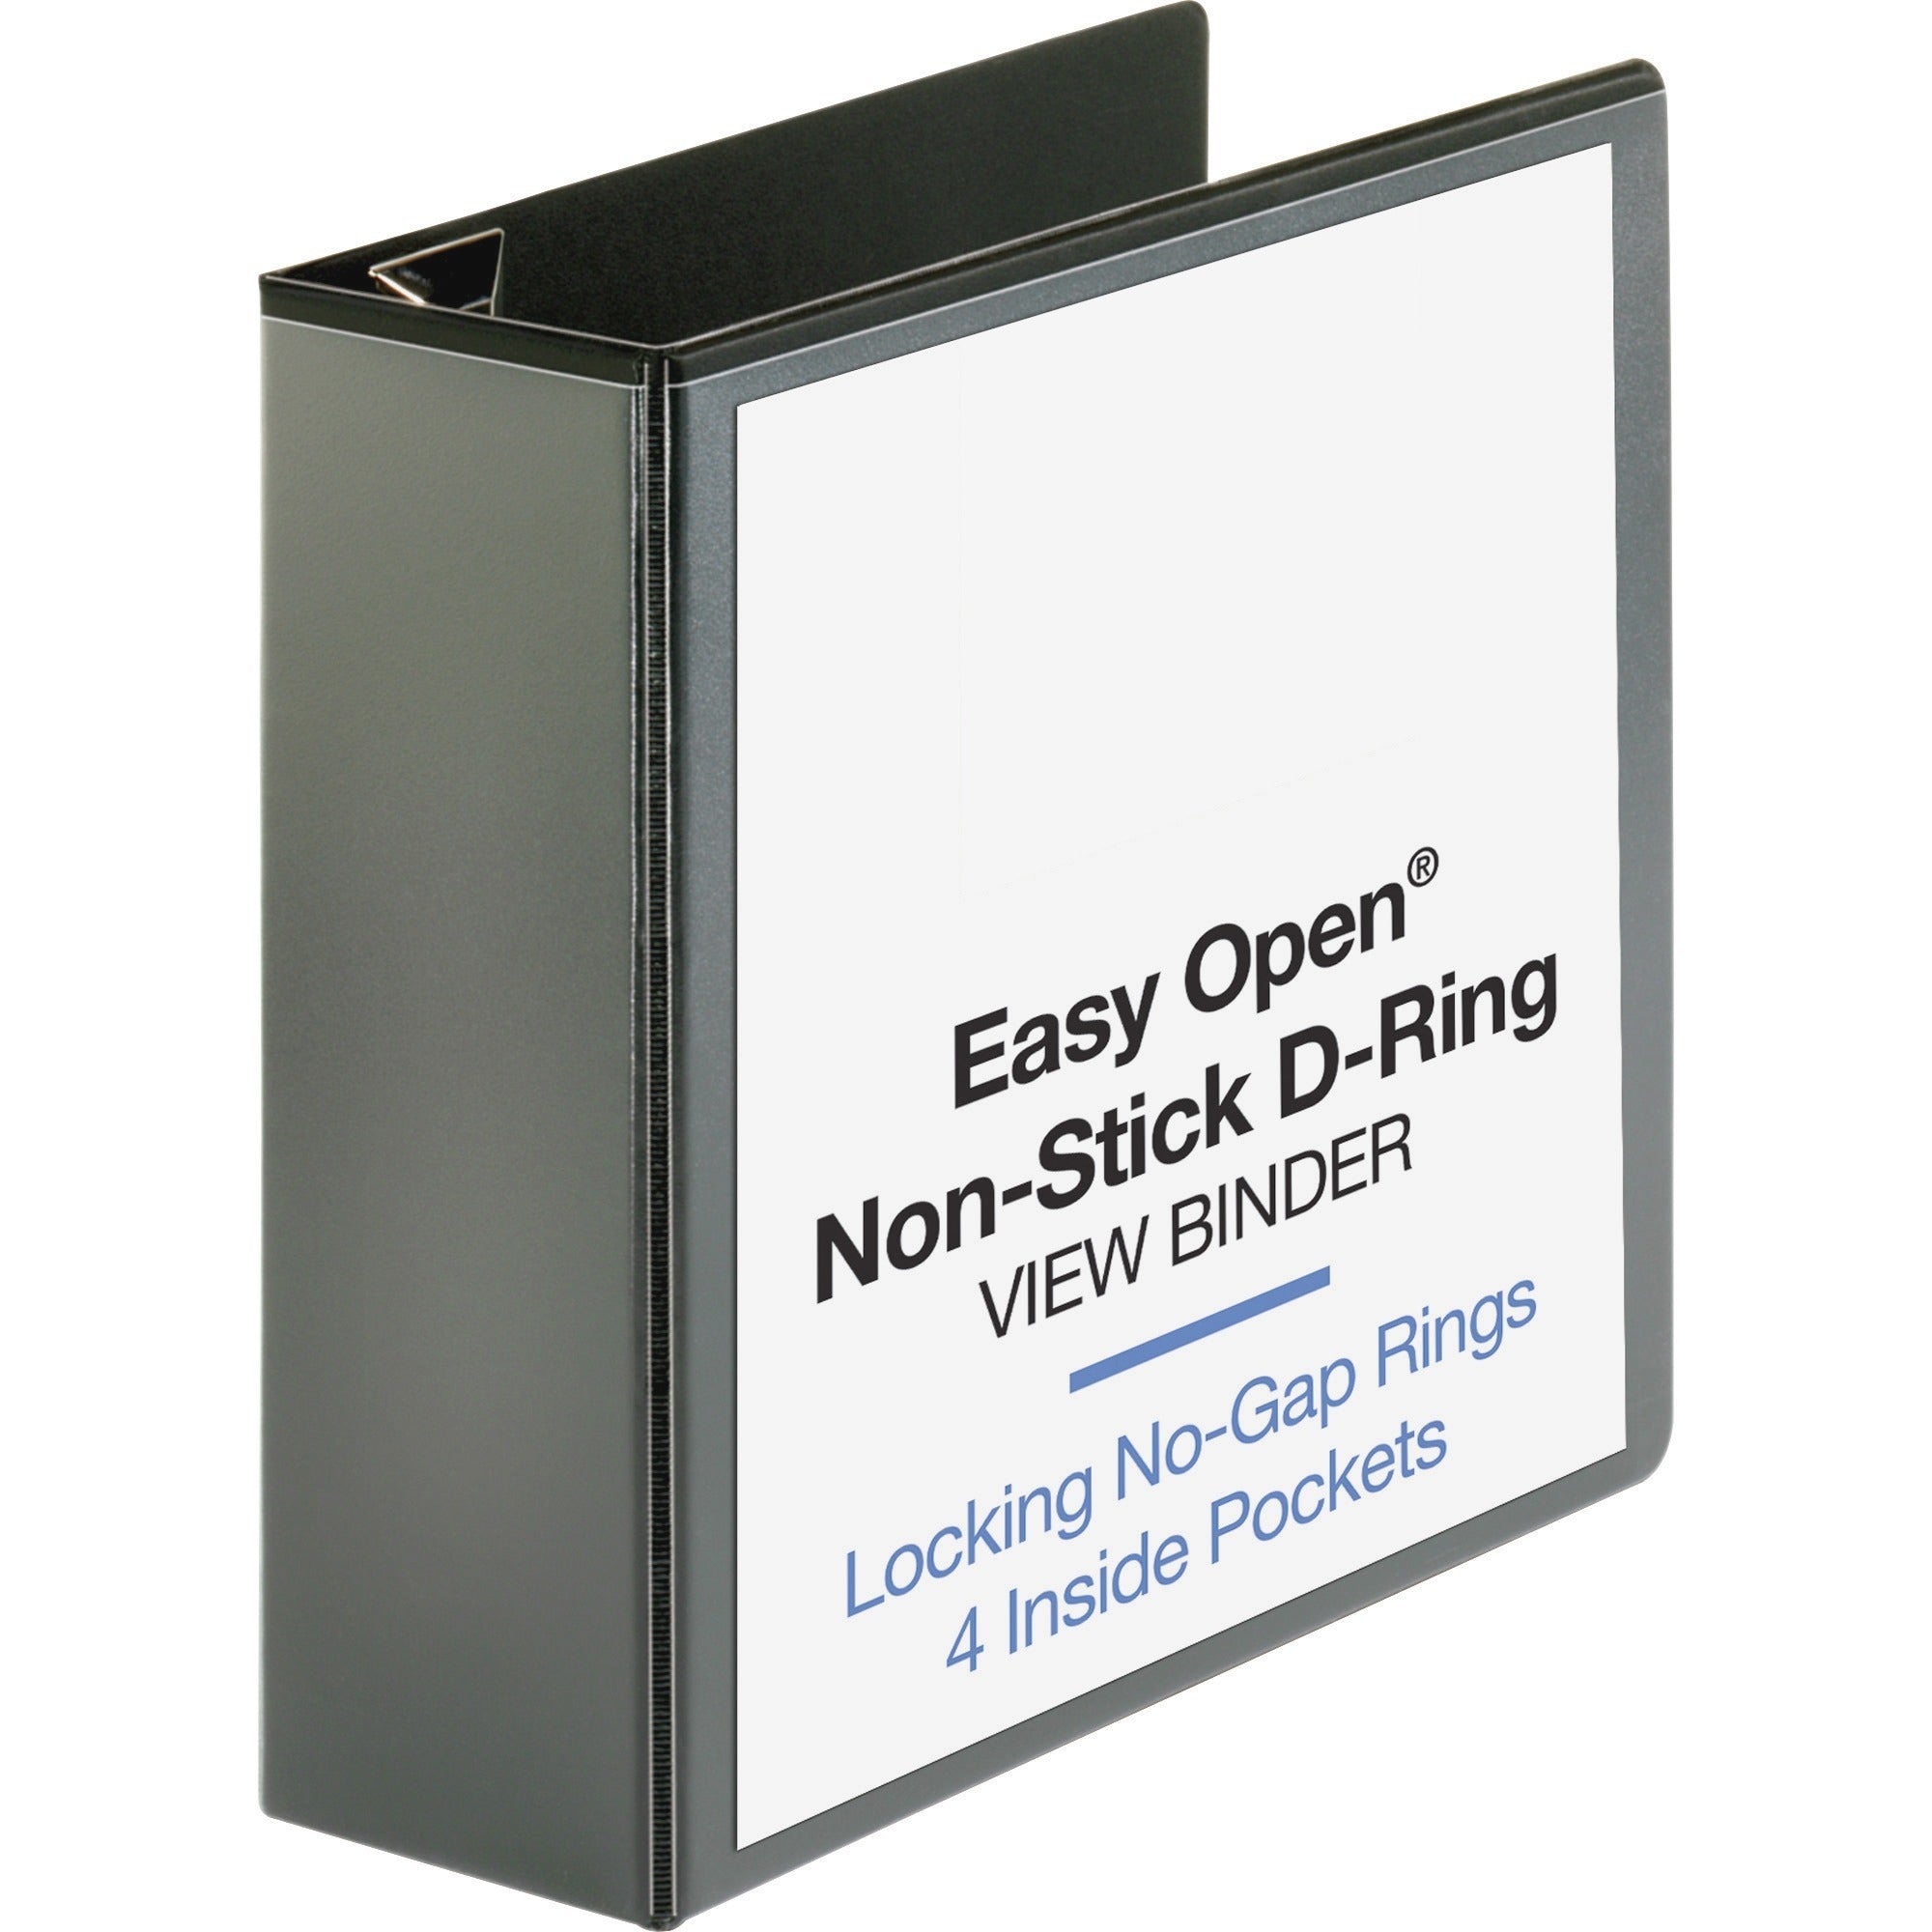 business-source-locking-d-ring-view-binder-4-binder-capacity-letter-8-1-2-x-11-sheet-size-775-sheet-capacity-d-ring-fasteners-4-inside-front-&-back-pockets-polypropylene-chipboard-black-recycled-non-glare-sturdy-exposed_bsn26964 - 1